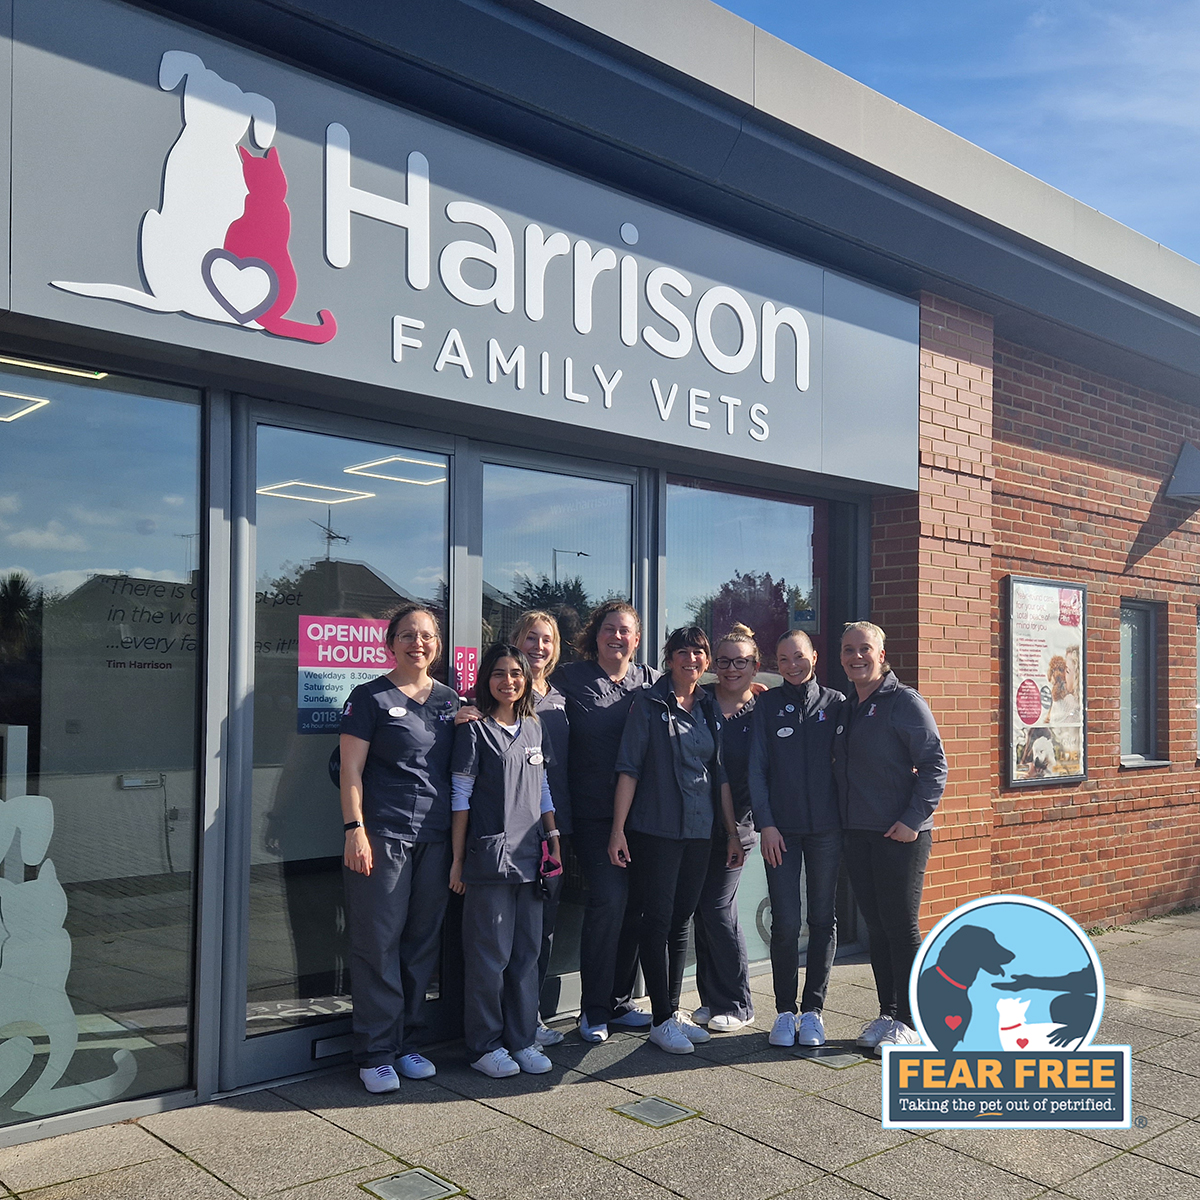 Harrison Family Vets achieves UK’s ‘Fear Free’ first